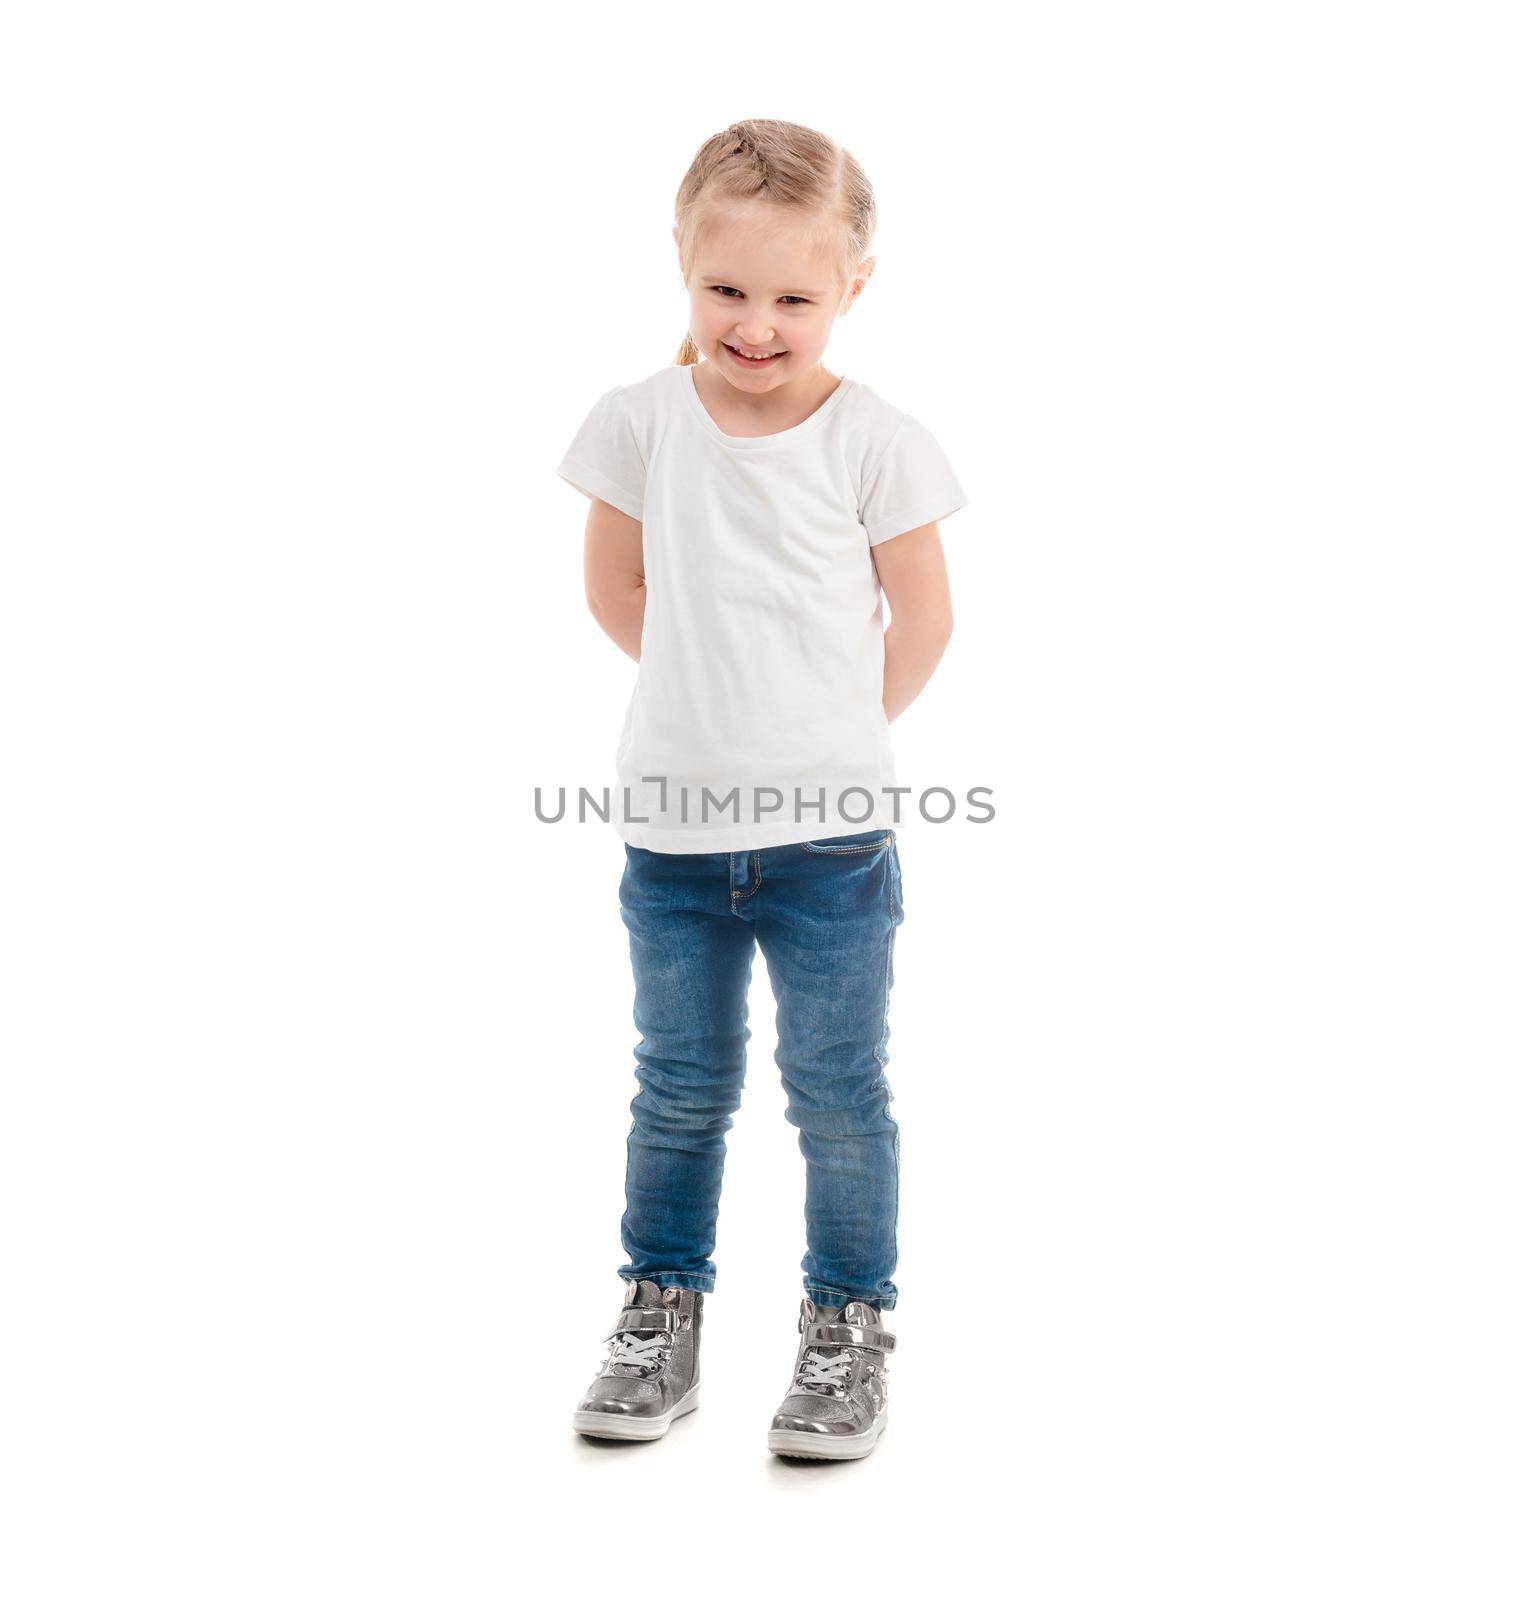 girl in t-shirt standing isolated on white background by tan4ikk1